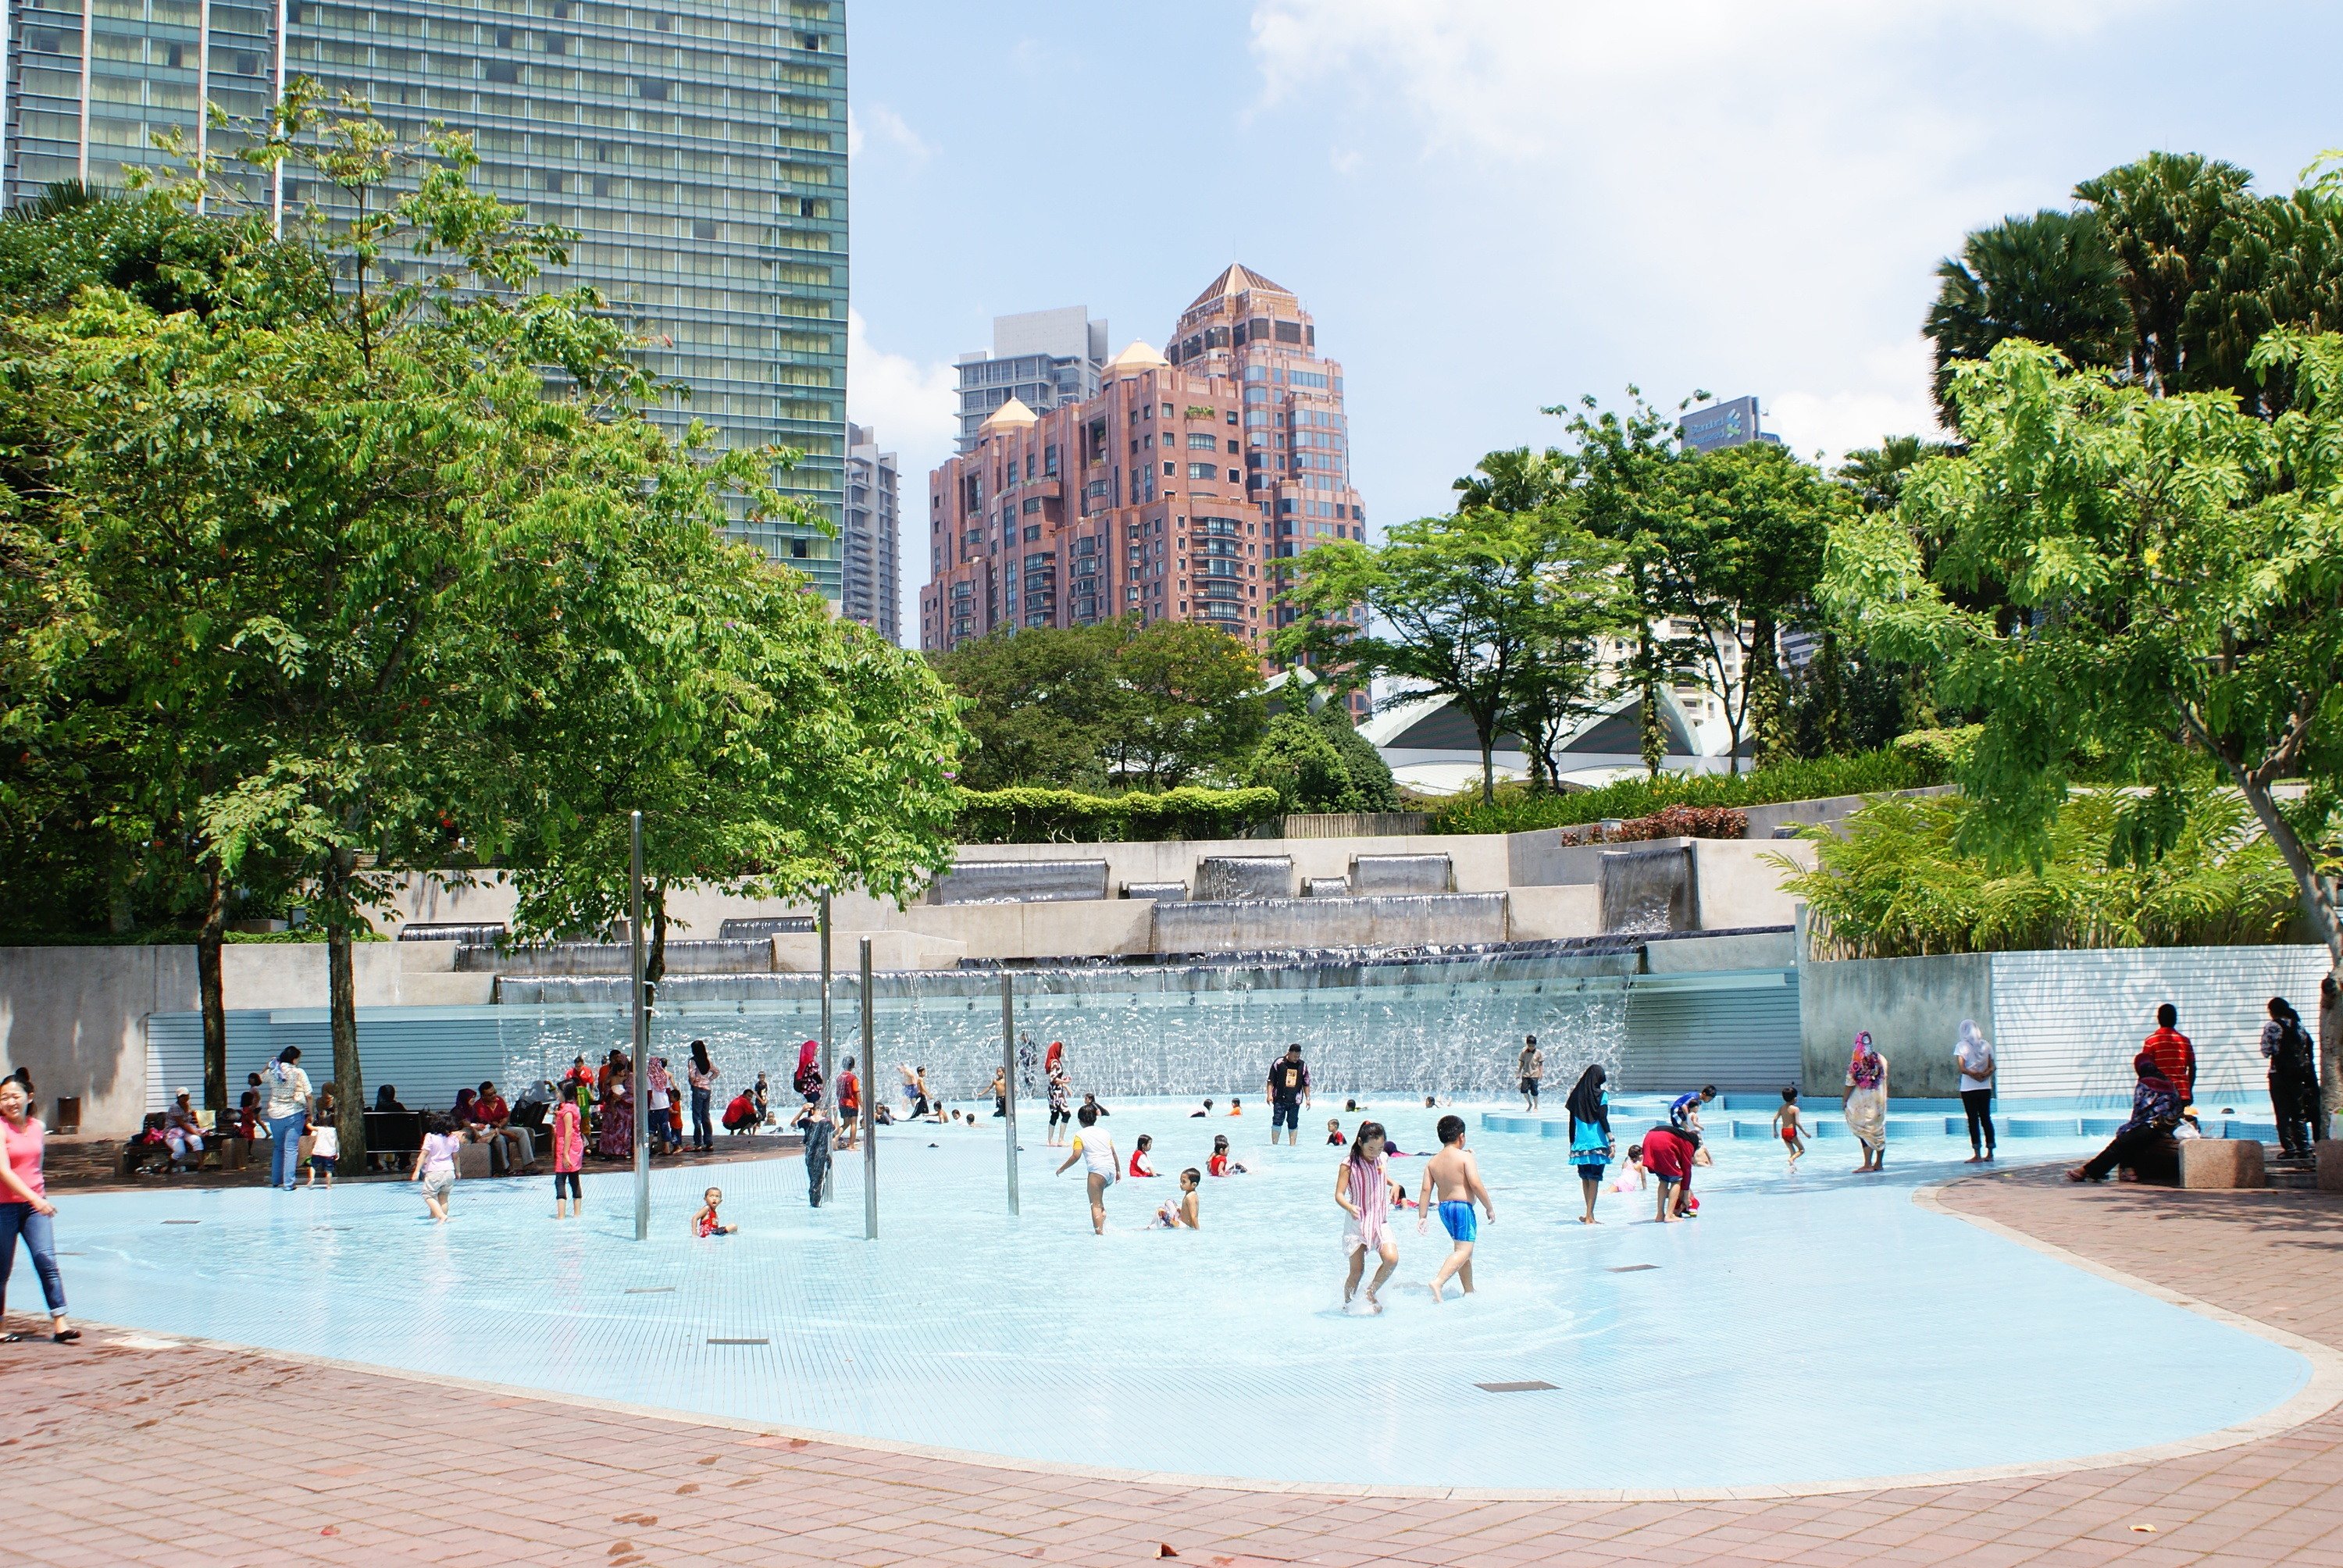 KLCC park, a popular urban tourist attraction in Malaysia